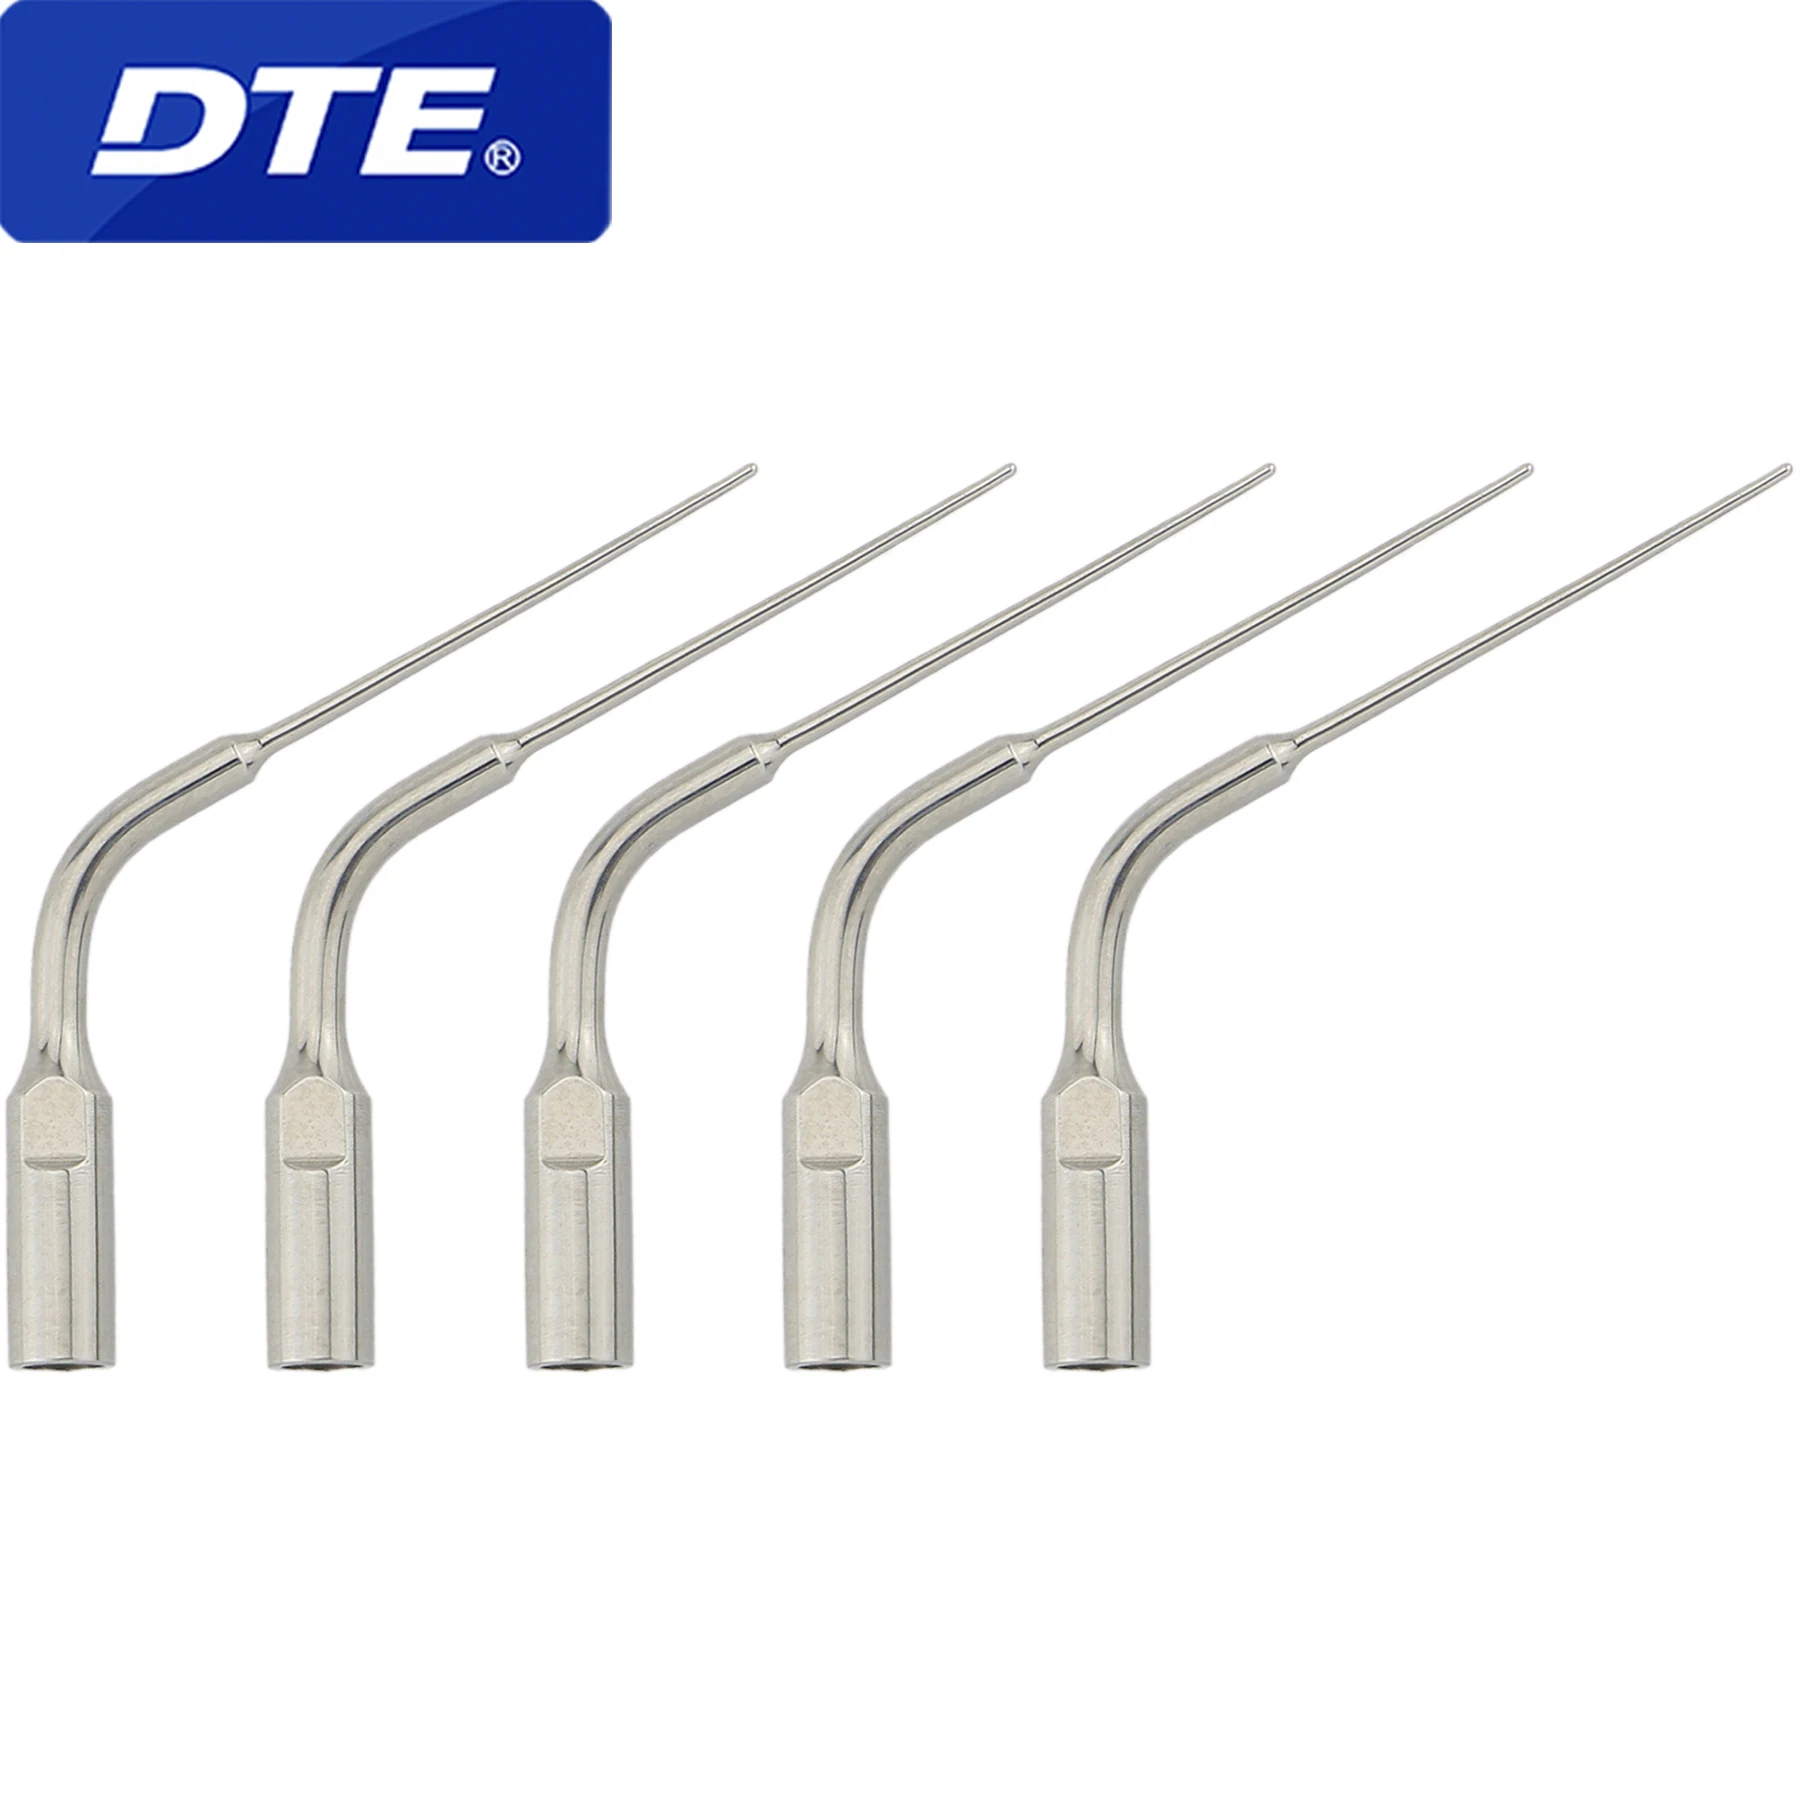 DTE Dental Ultrasonic Scaler Tip ED4 Root Canal Periodontics Endodontics Periodontal Supplies Tools Compatible With NSK SATELEC